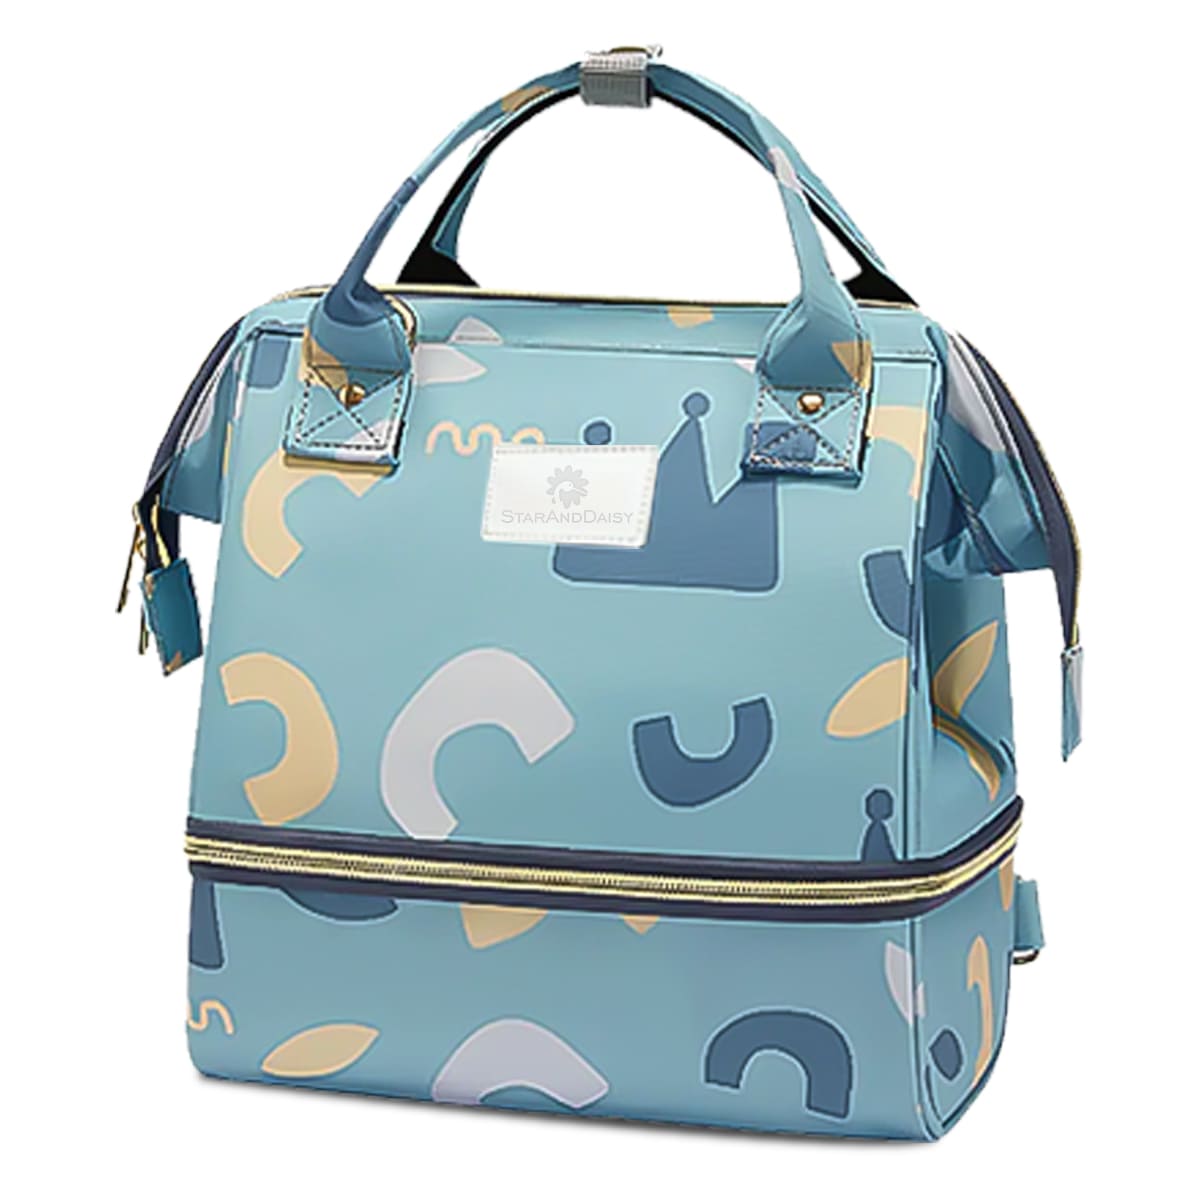 Diaper Bags For Mothers